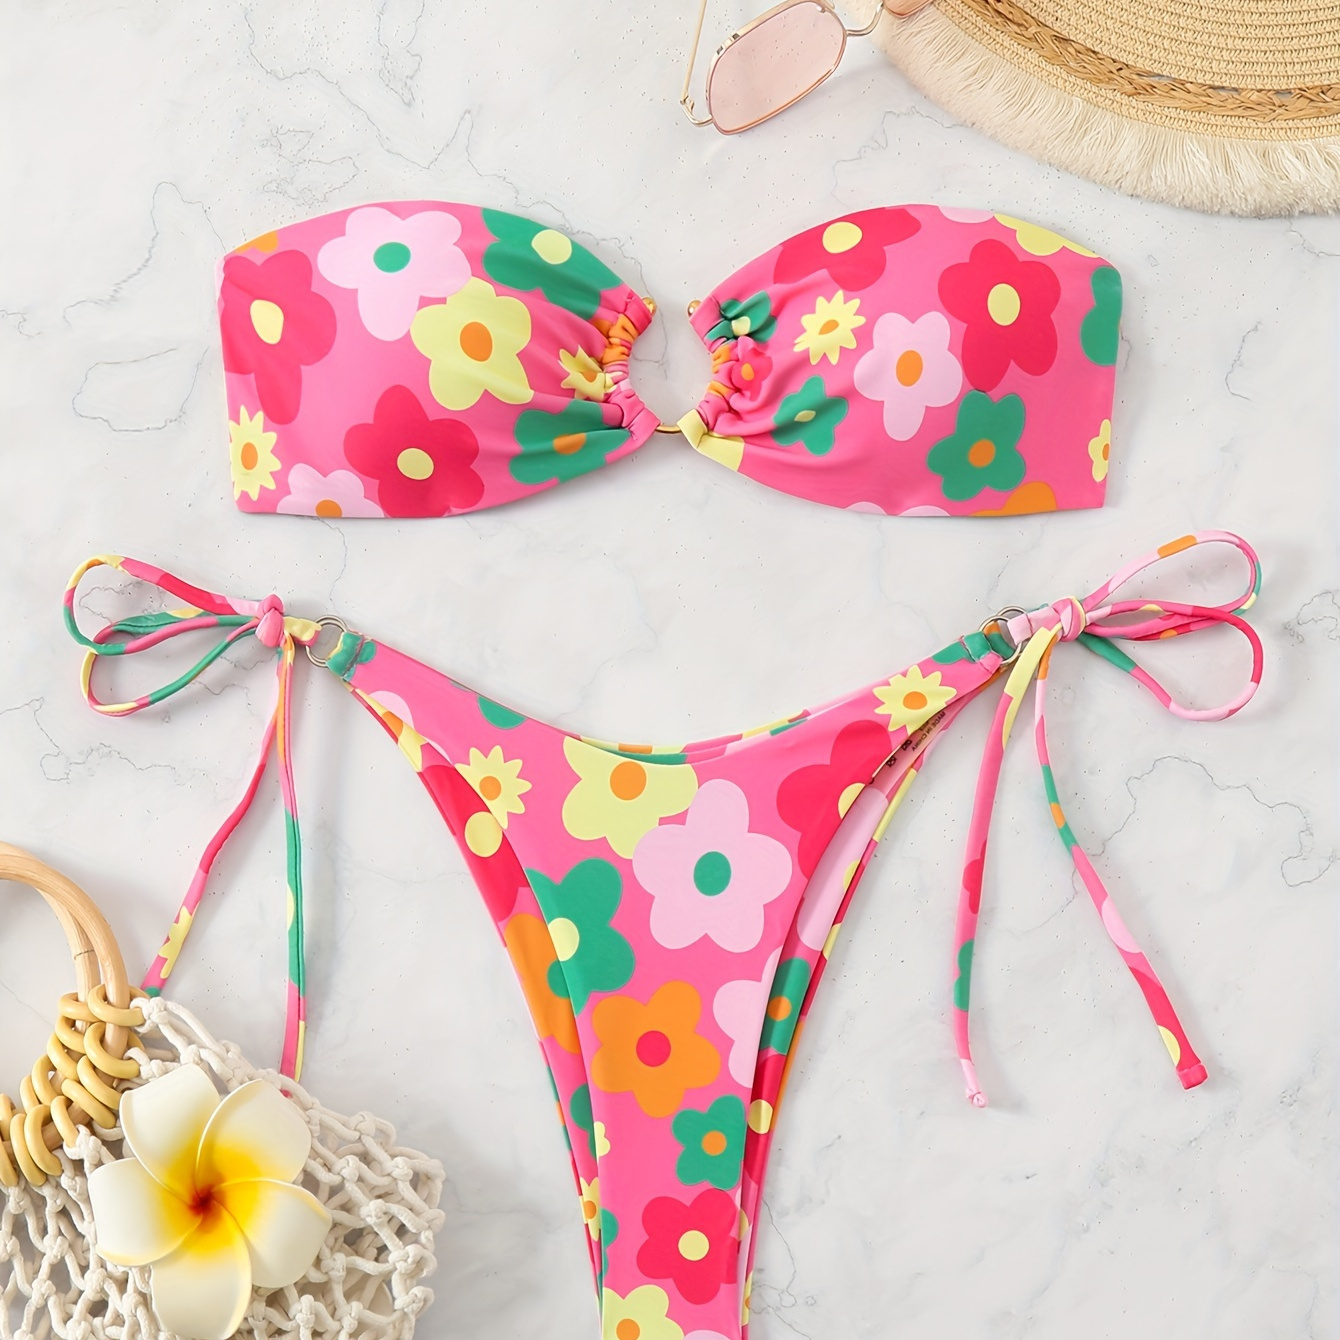 

Women's Floral Bikini Set, Two-piece Swimsuit With Tie Side Bottoms, Bandeau Top With Ring-linked, Quick-dry Beachwear, Summer Fashion Swimwear